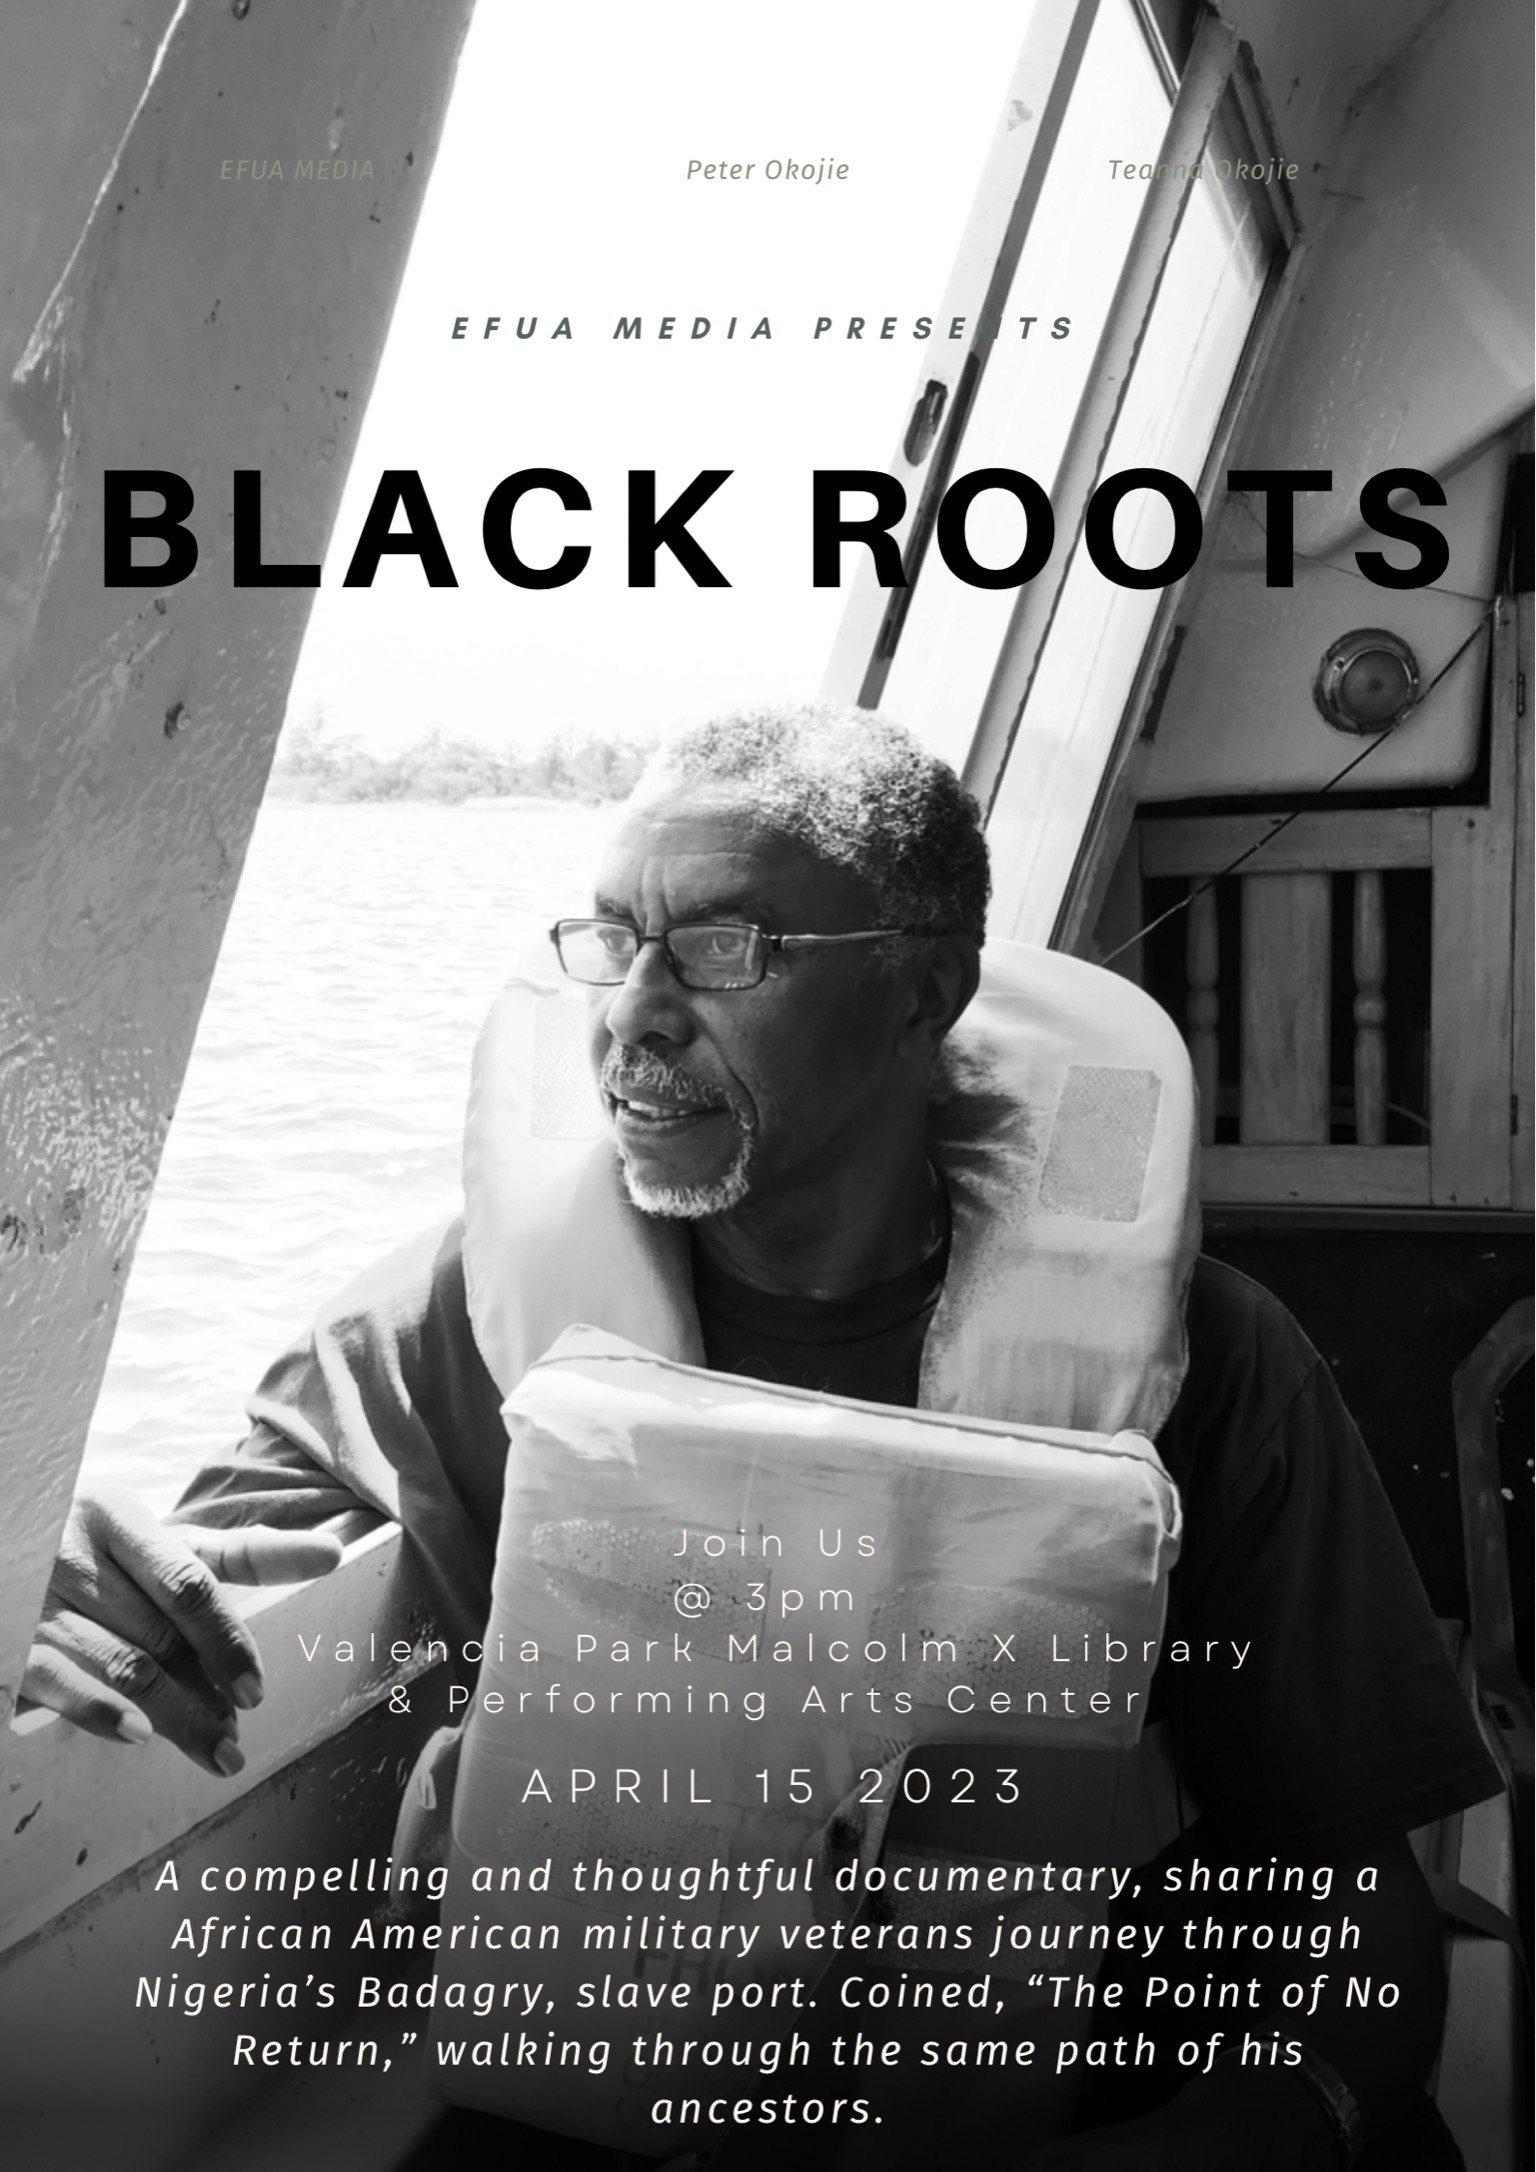 Black Roots text with image of an African American male veteran seated at the window of a ferry boat